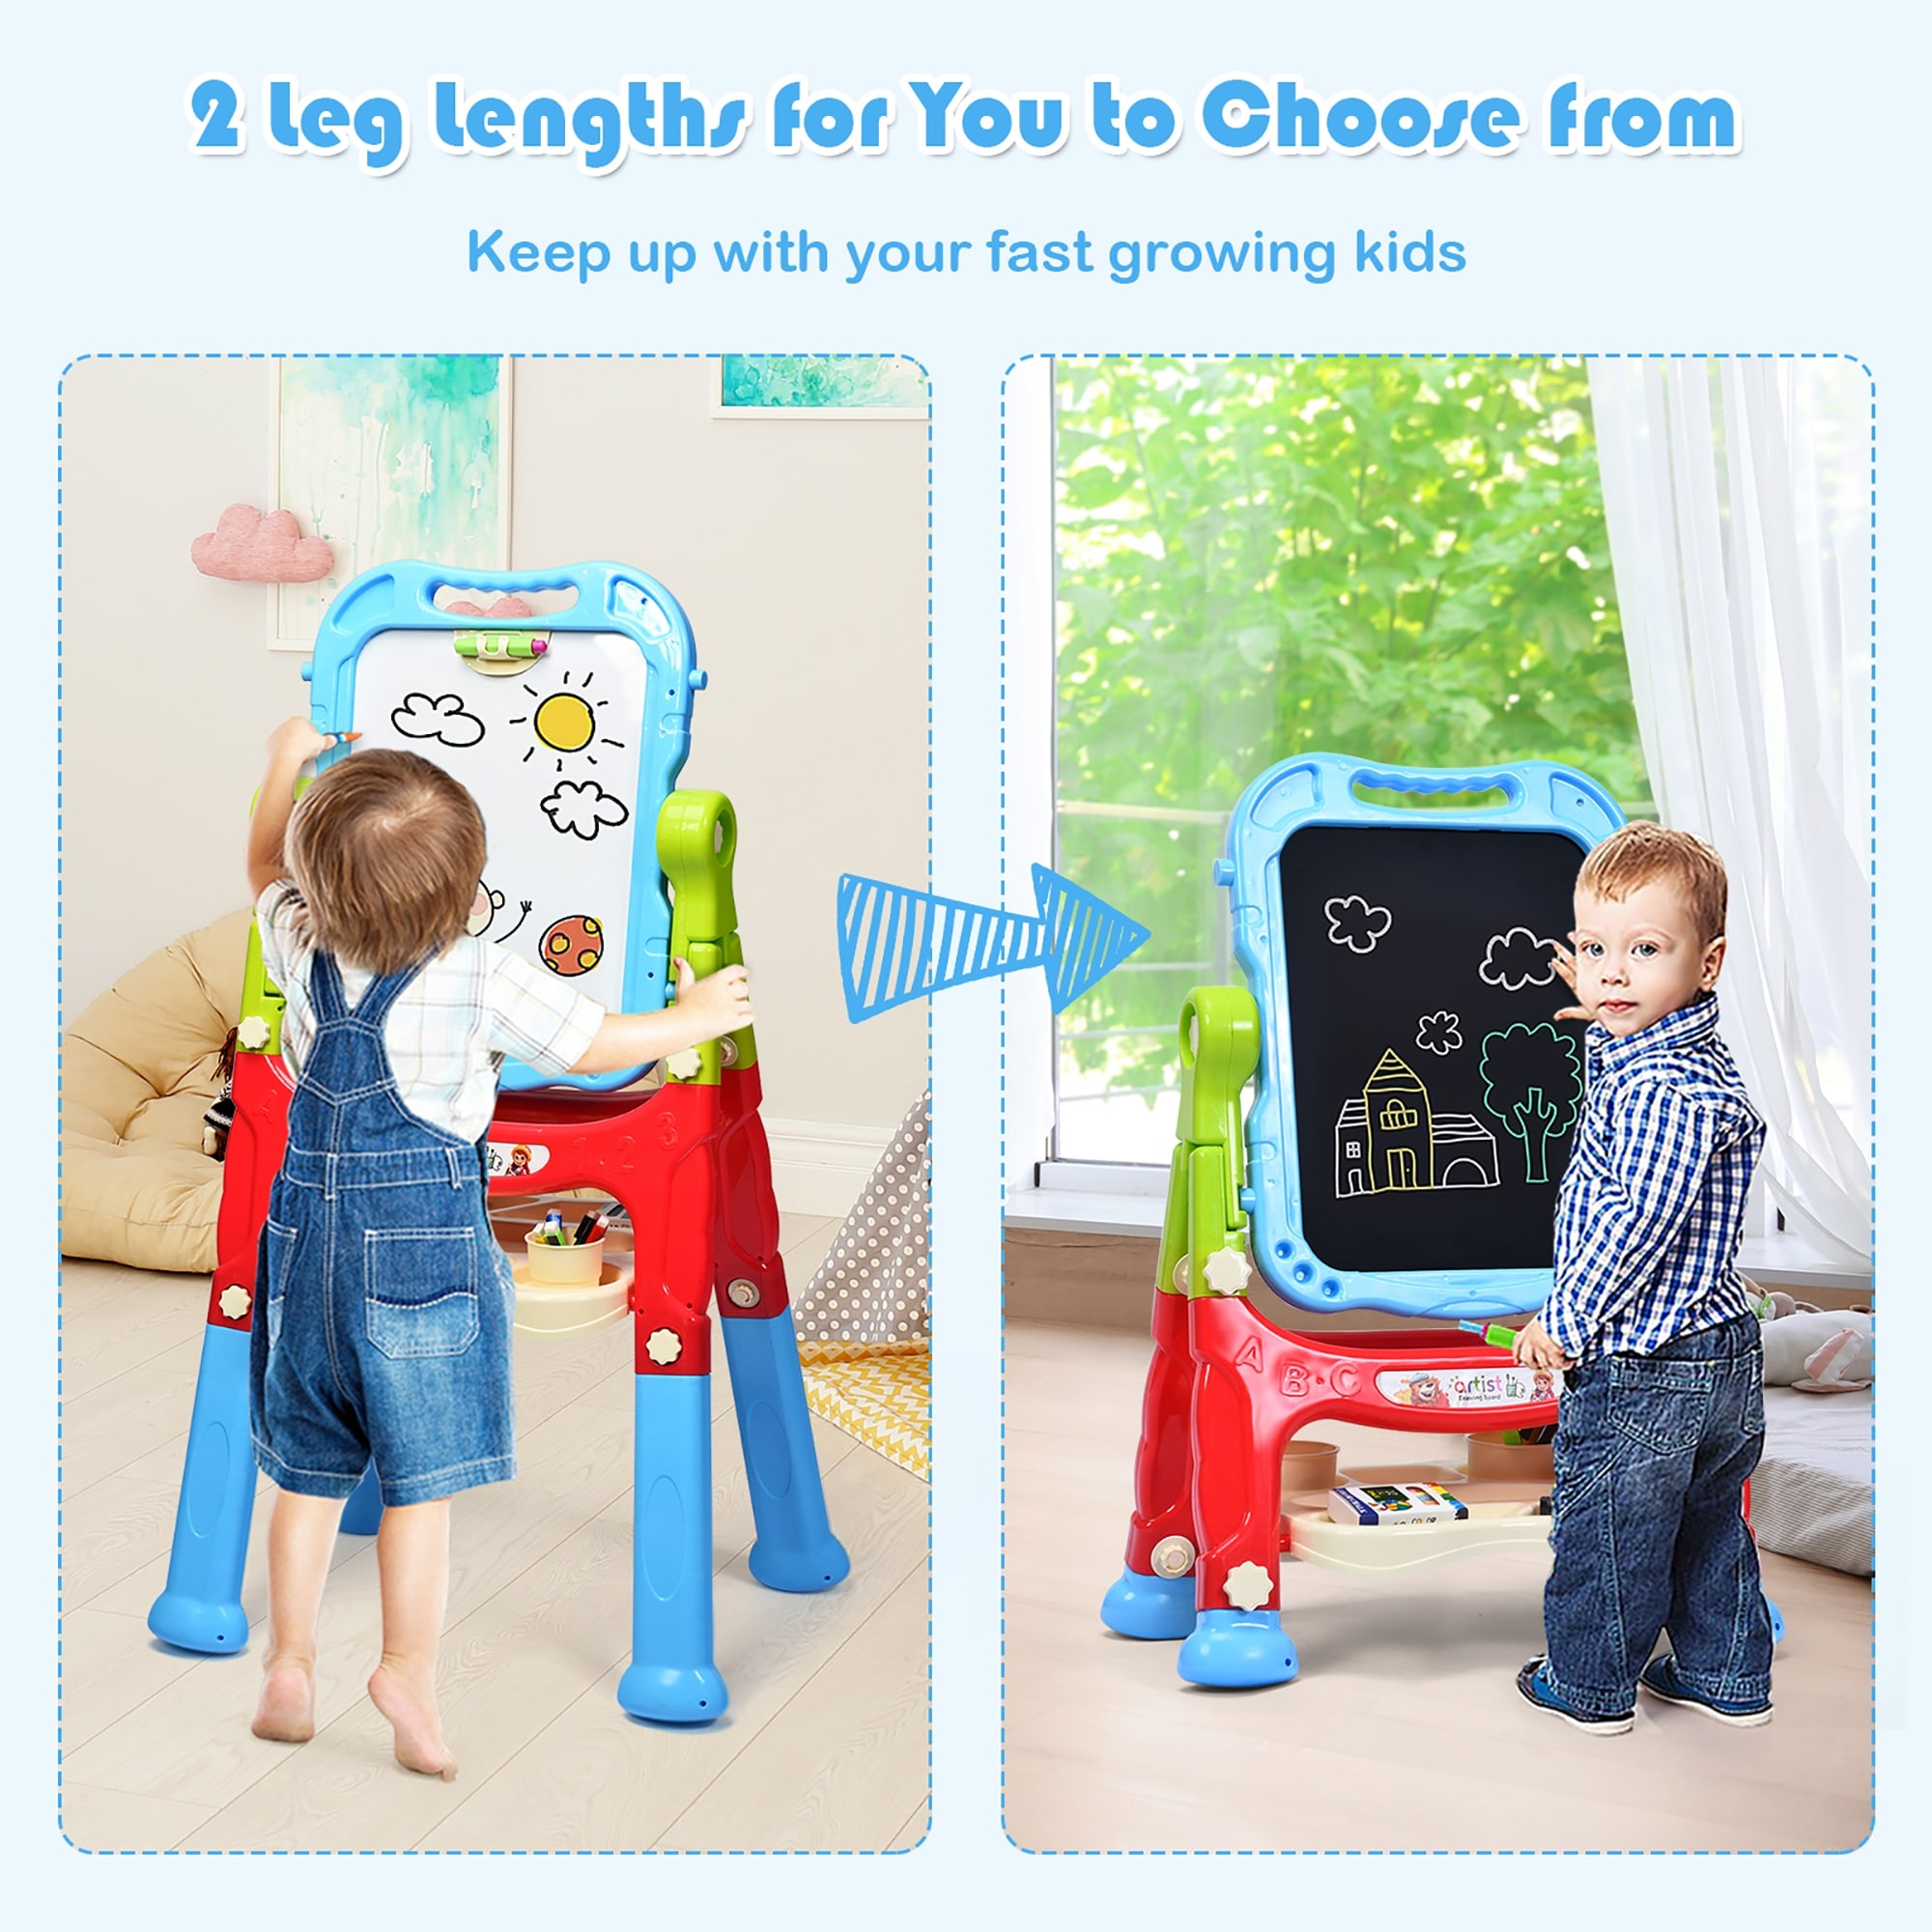 https://ak1.ostkcdn.com/images/products/is/images/direct/0dac1f64c57956d0f55cbb686df72a46d0cc3acb/Costway-Height-Adjustable-Kids-Art-Easel-Magnetic-Double-Sided-Board.jpg